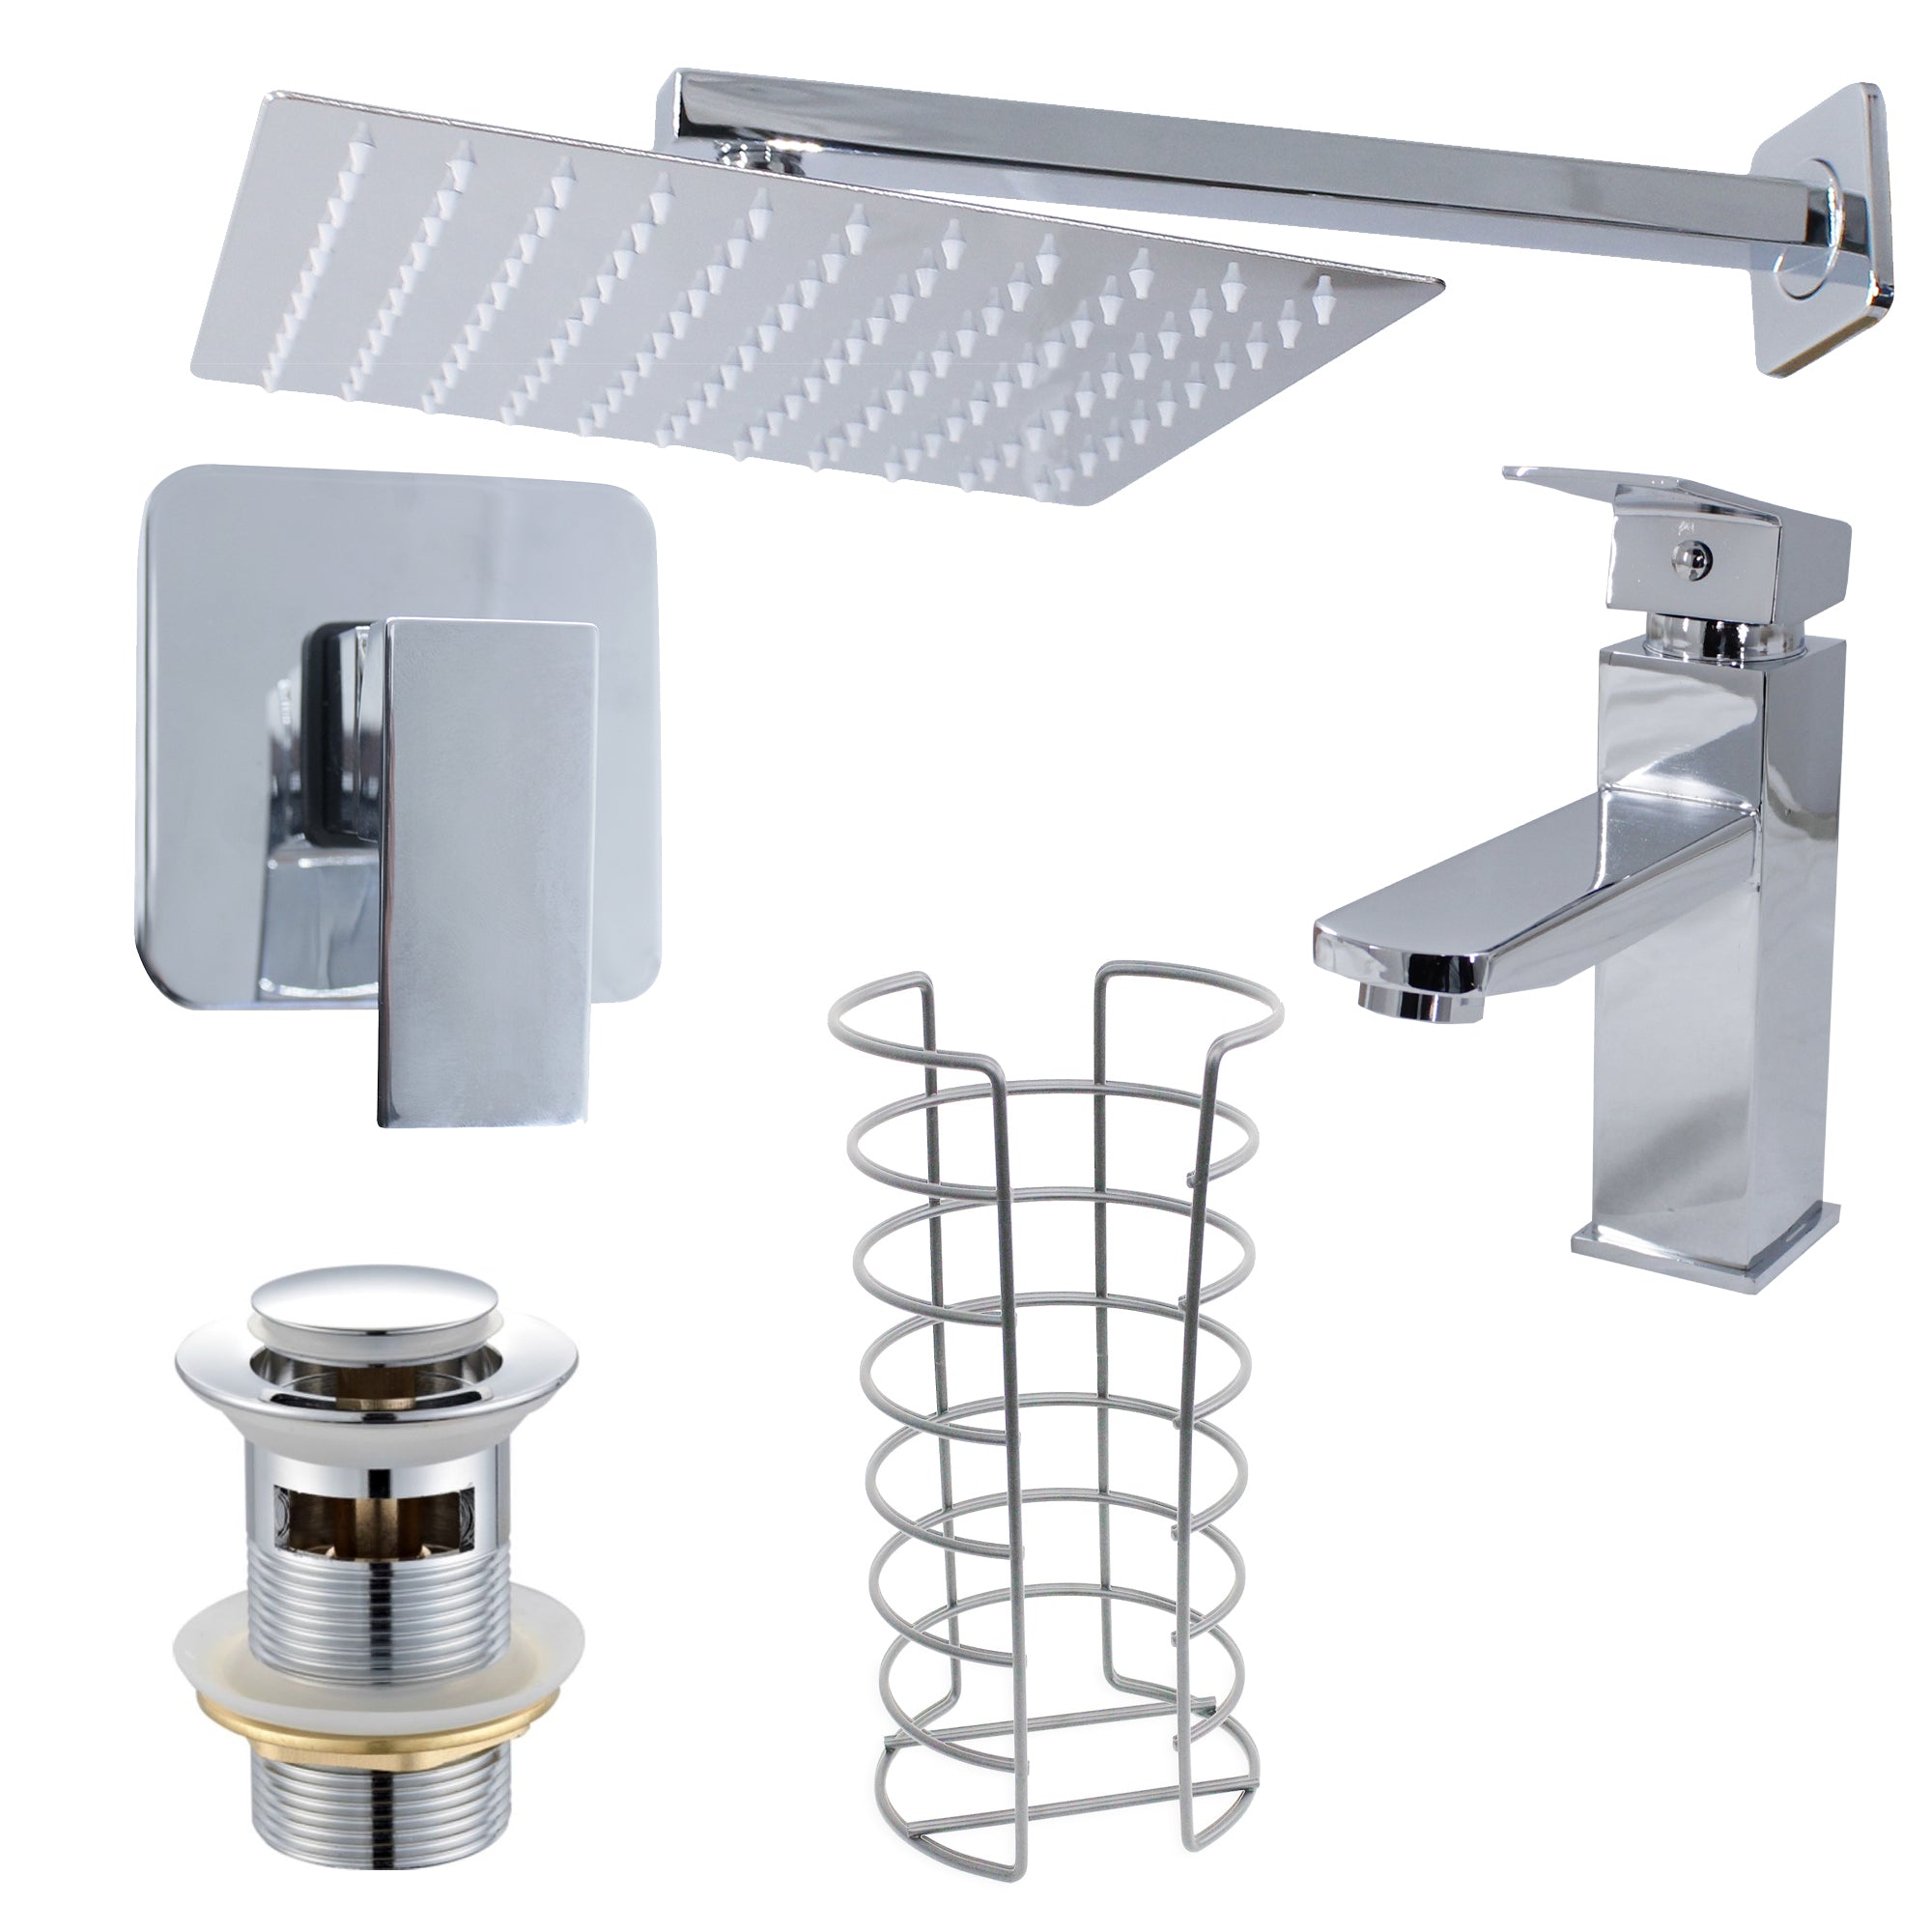 LMA Square Bathroom Accessories Set with Shower Head Arm & Mixer